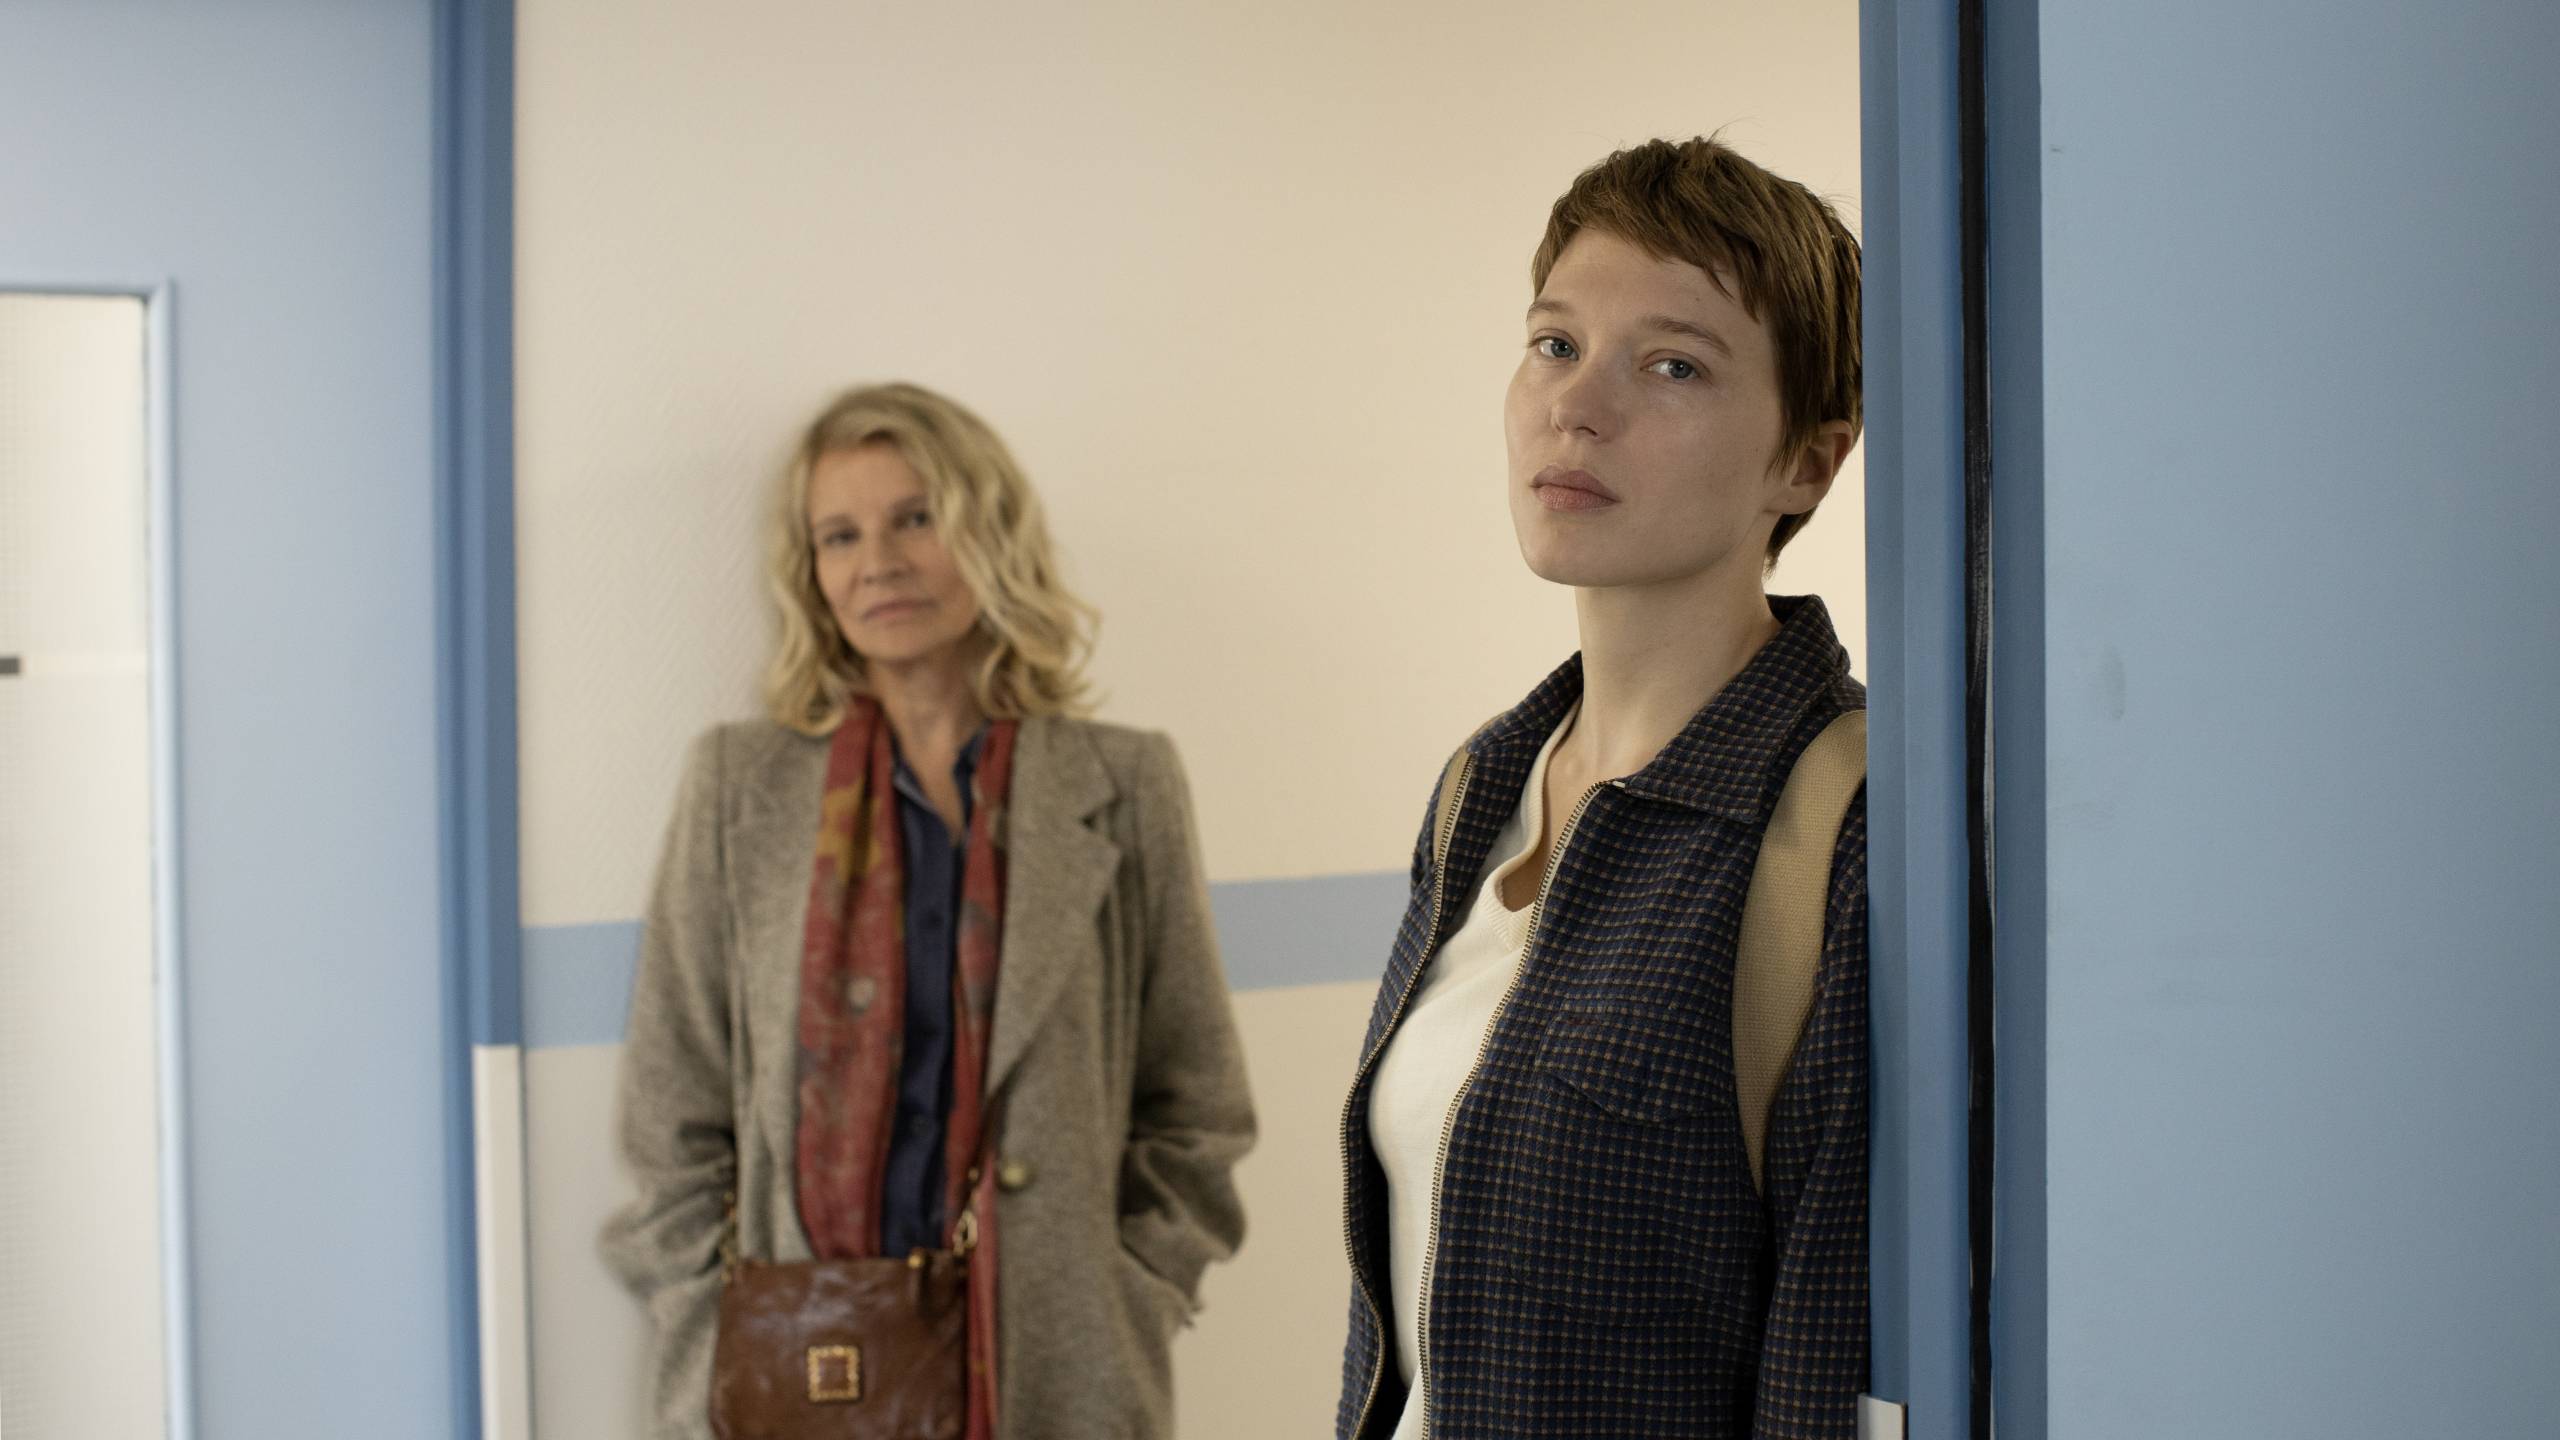 Older white woman leans against institutional wall with younger white woman in doorway